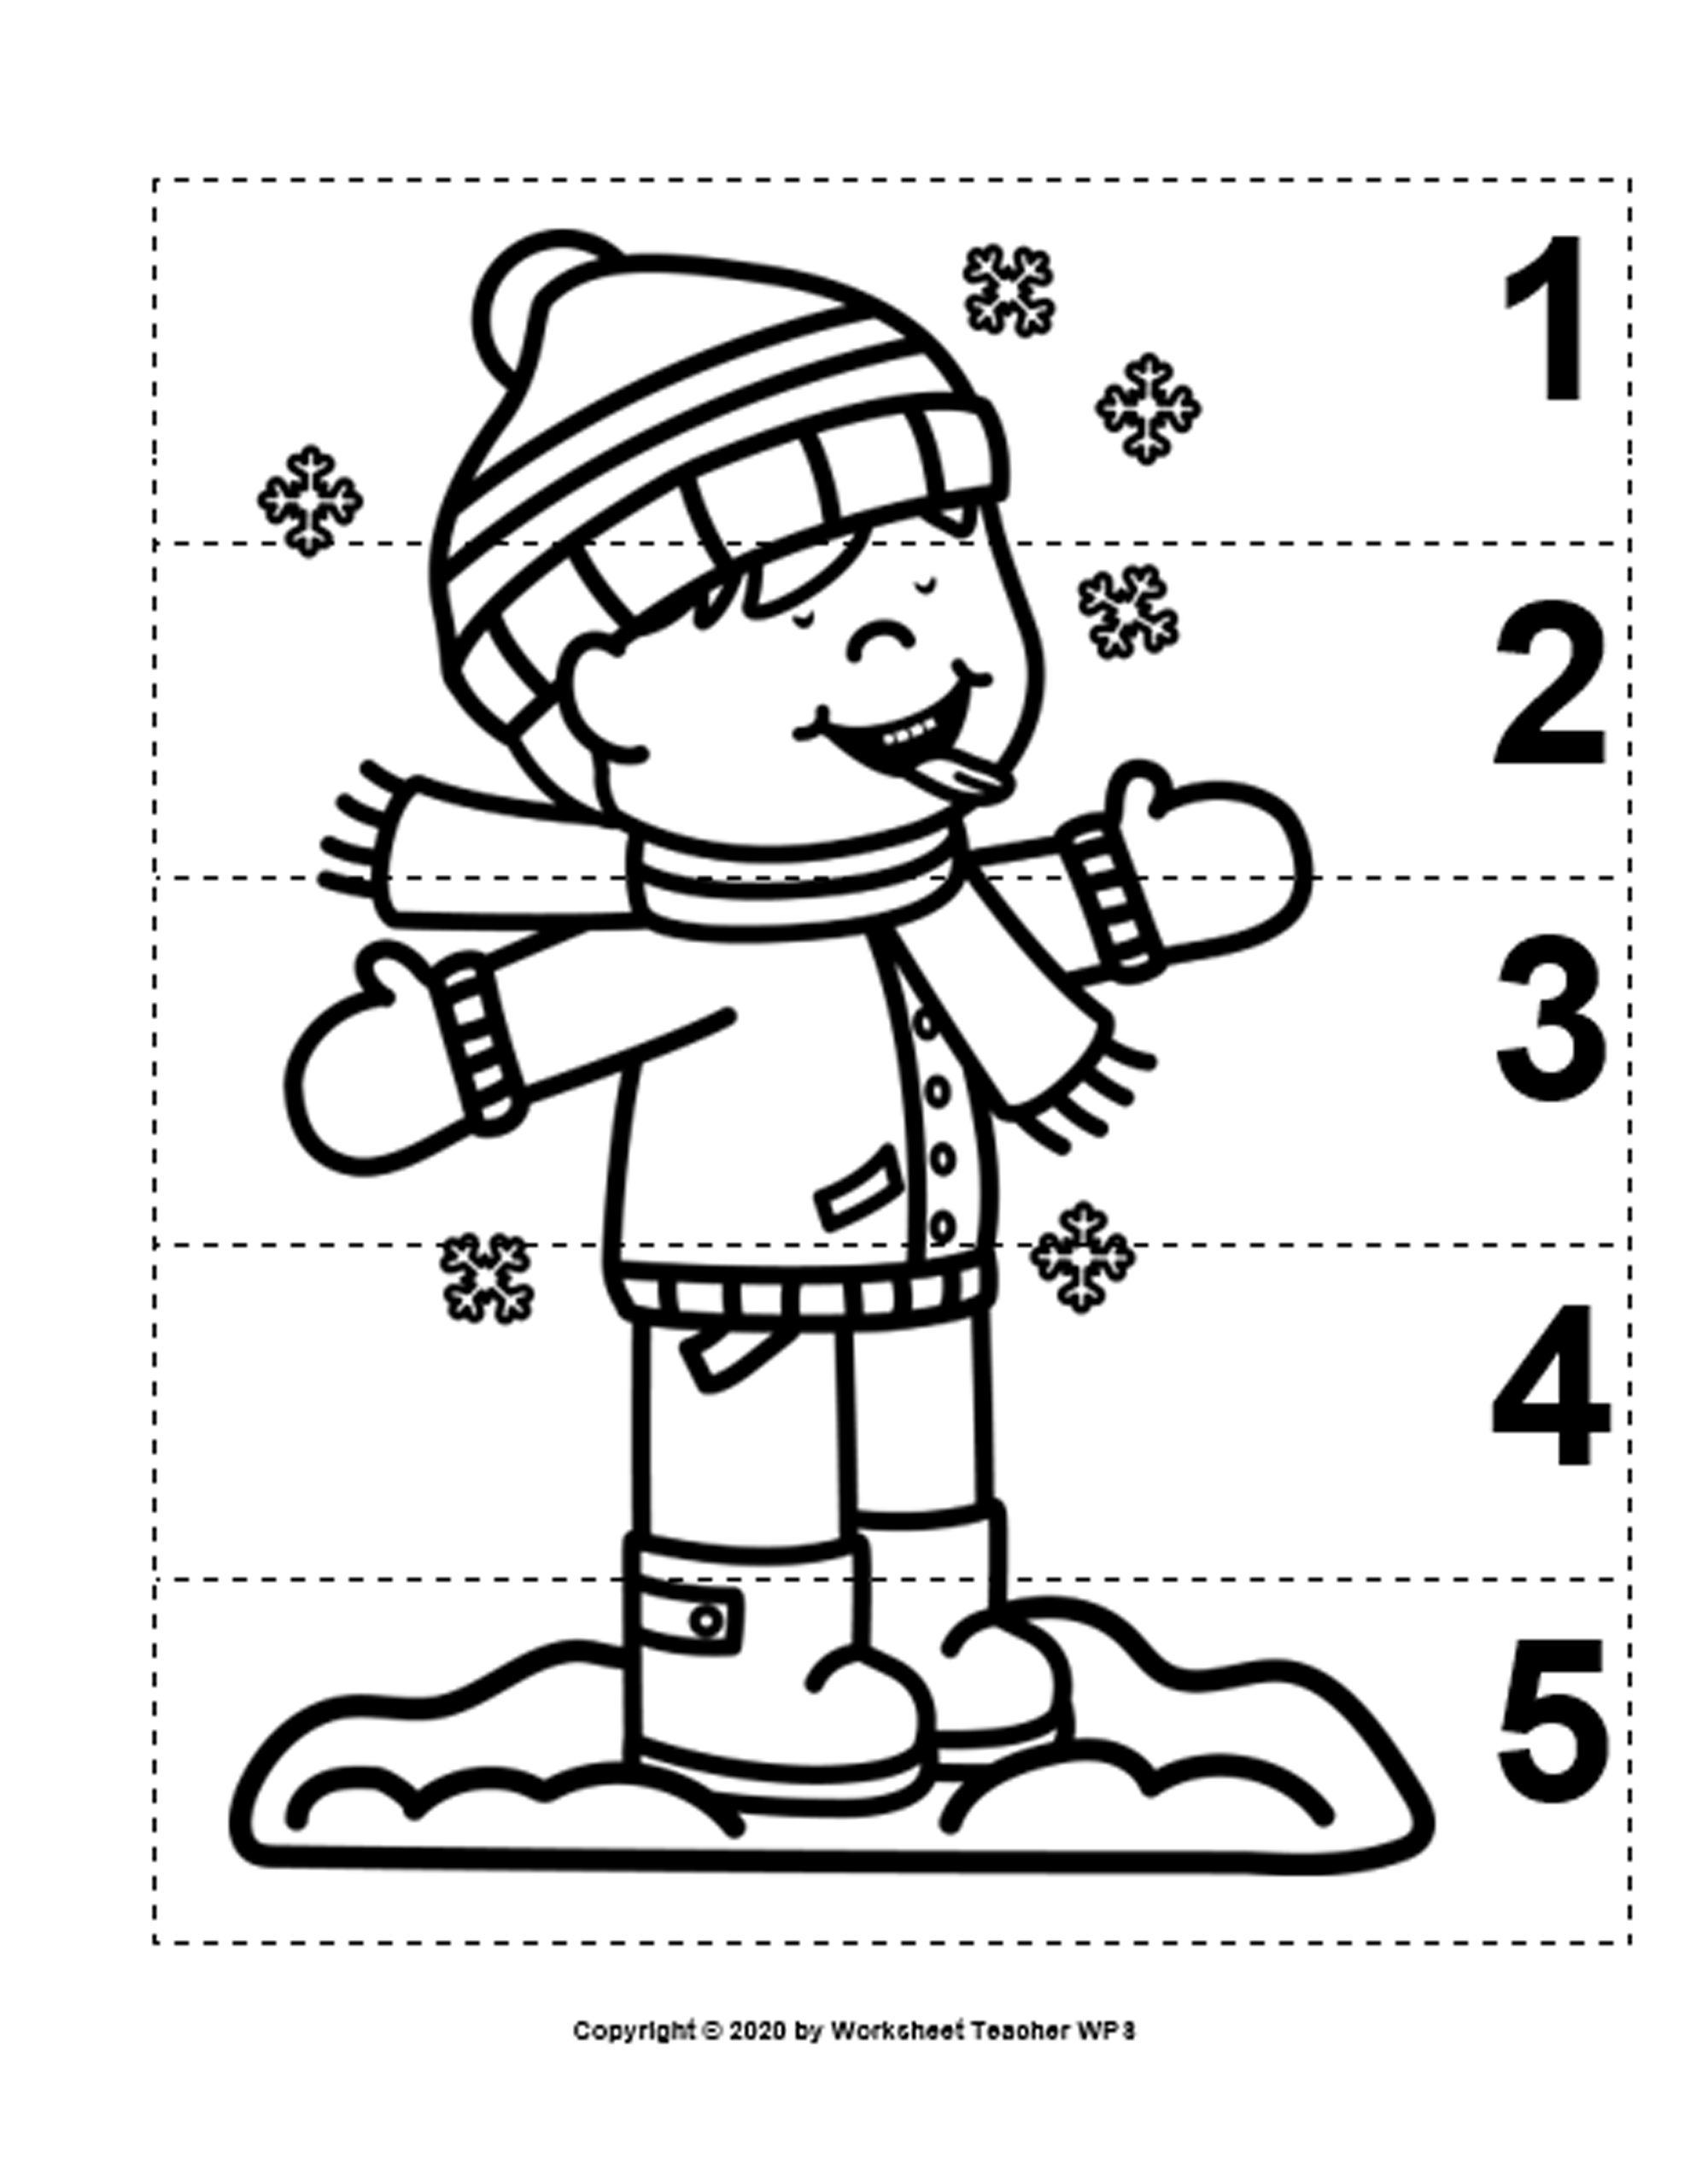 Winter number sequence bw picture puzzles made by teachers